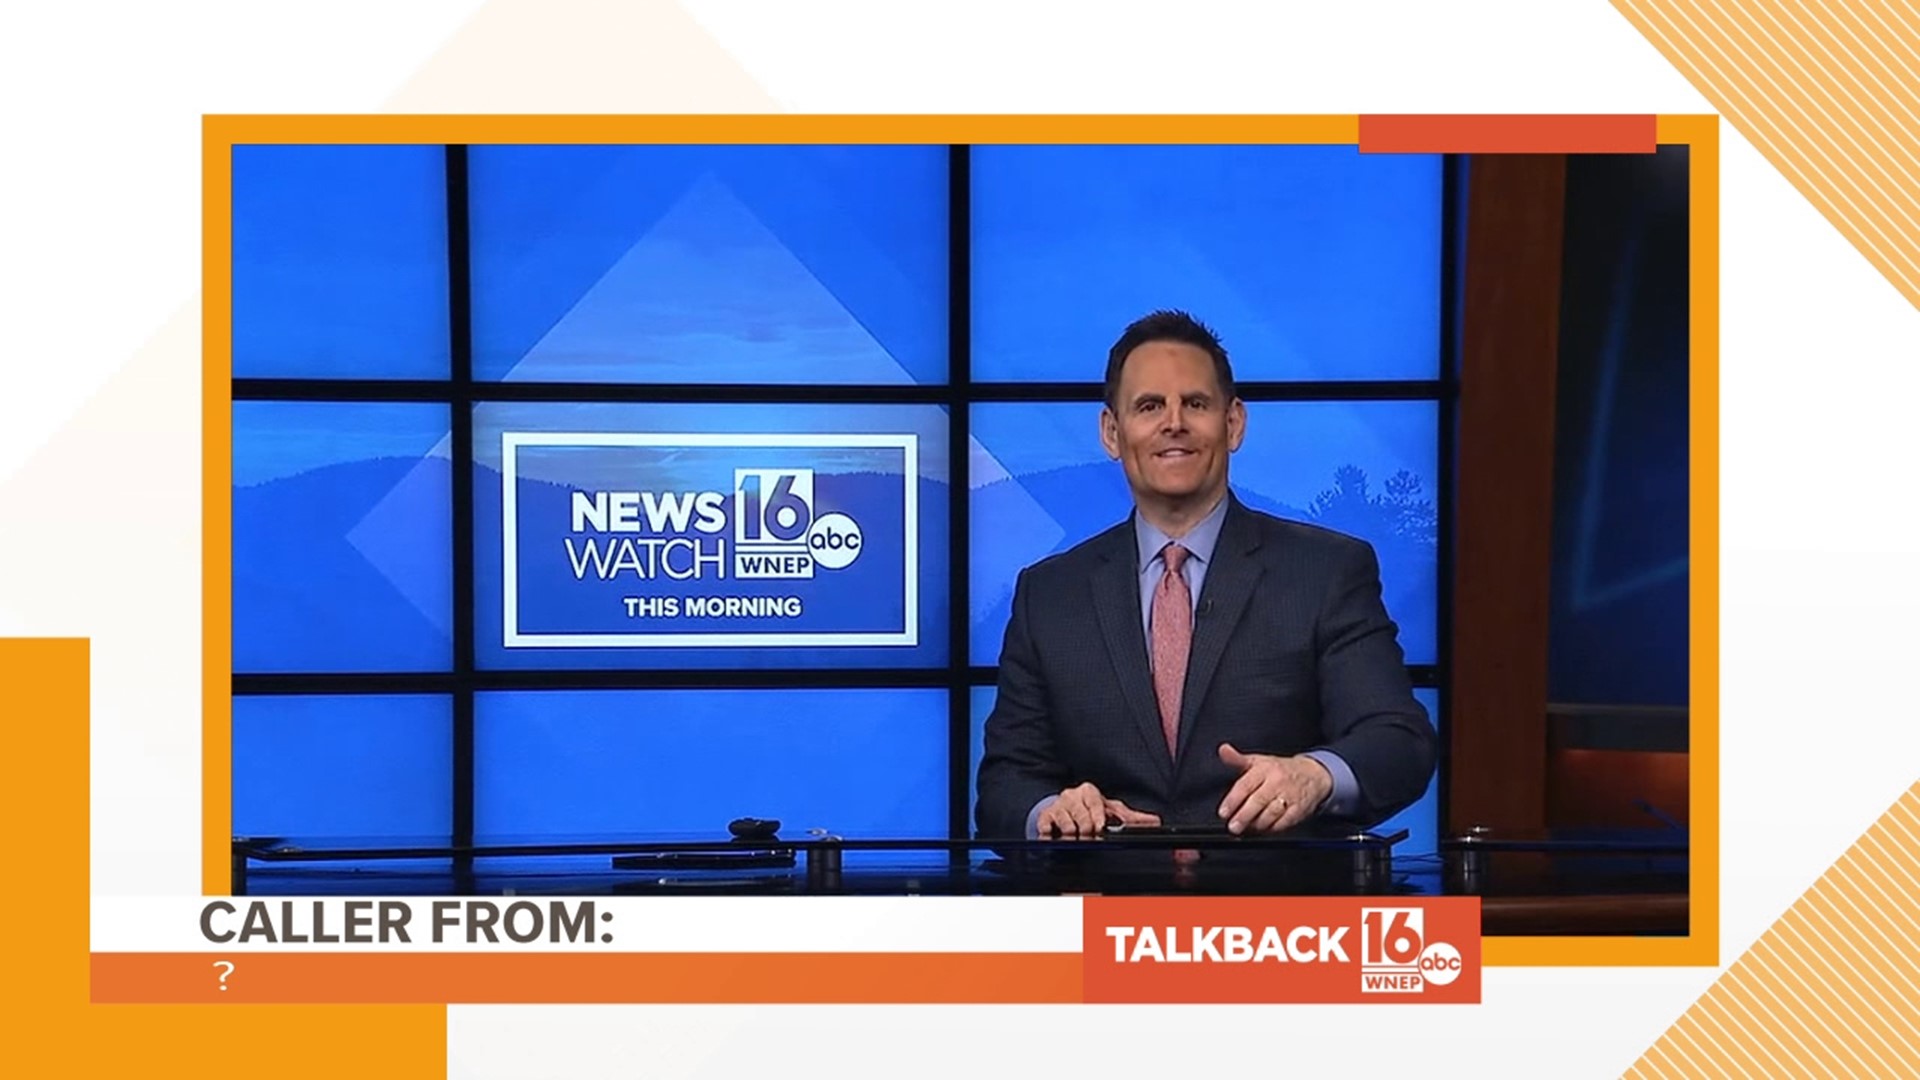 Callers are wishing WNEP's beloved Tom Williams good luck and farewell.